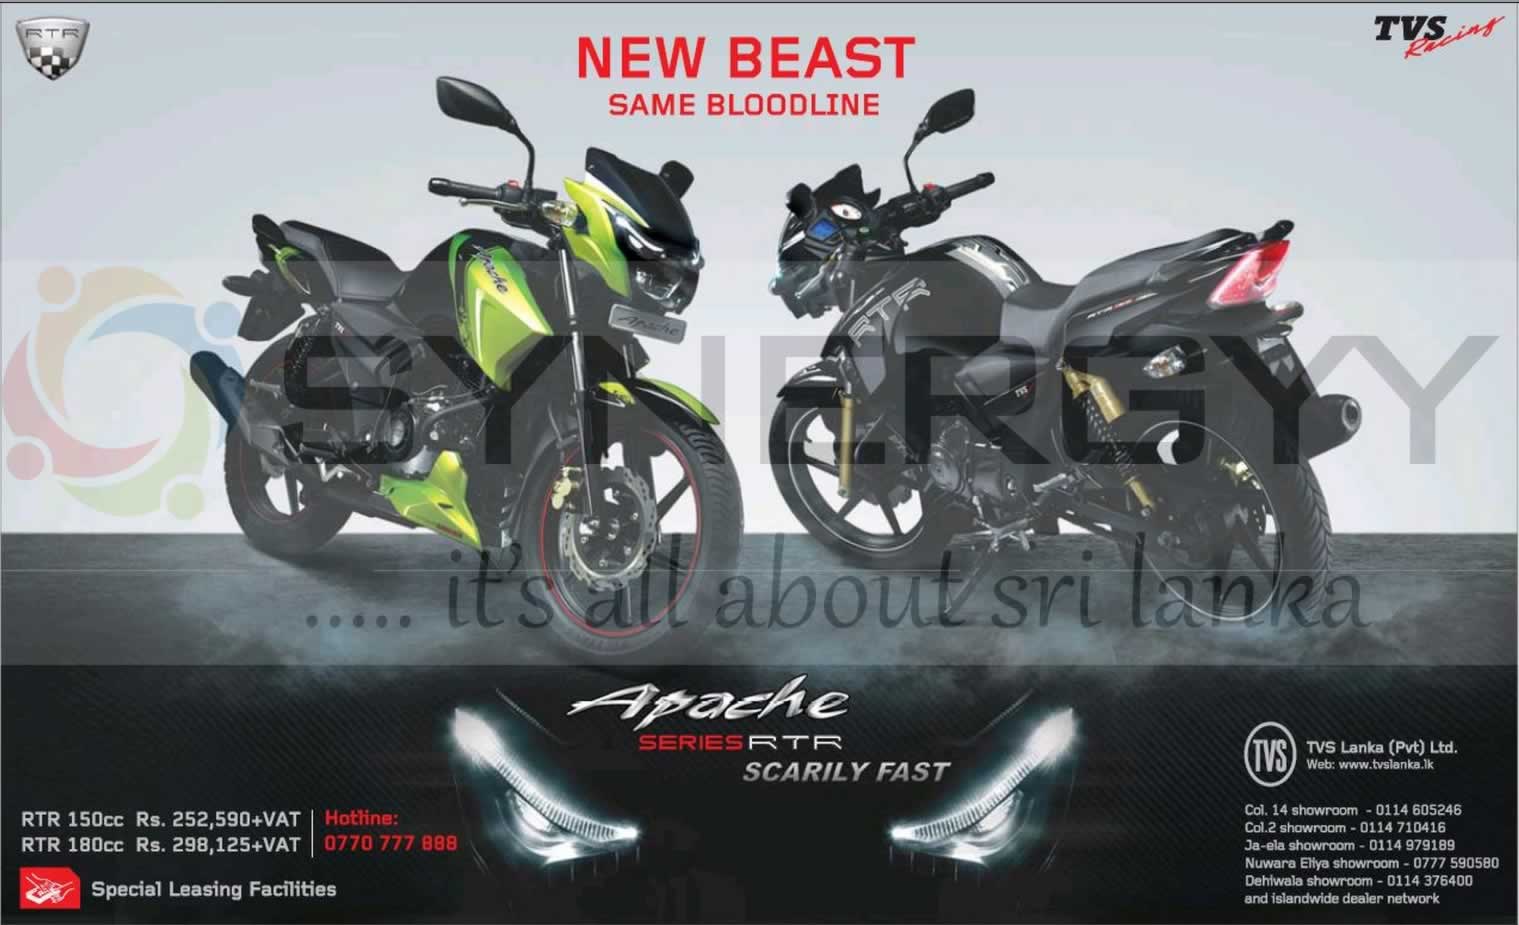 Apache Series Rtr Prices From Rs 252 590 00 Vat Onwards From